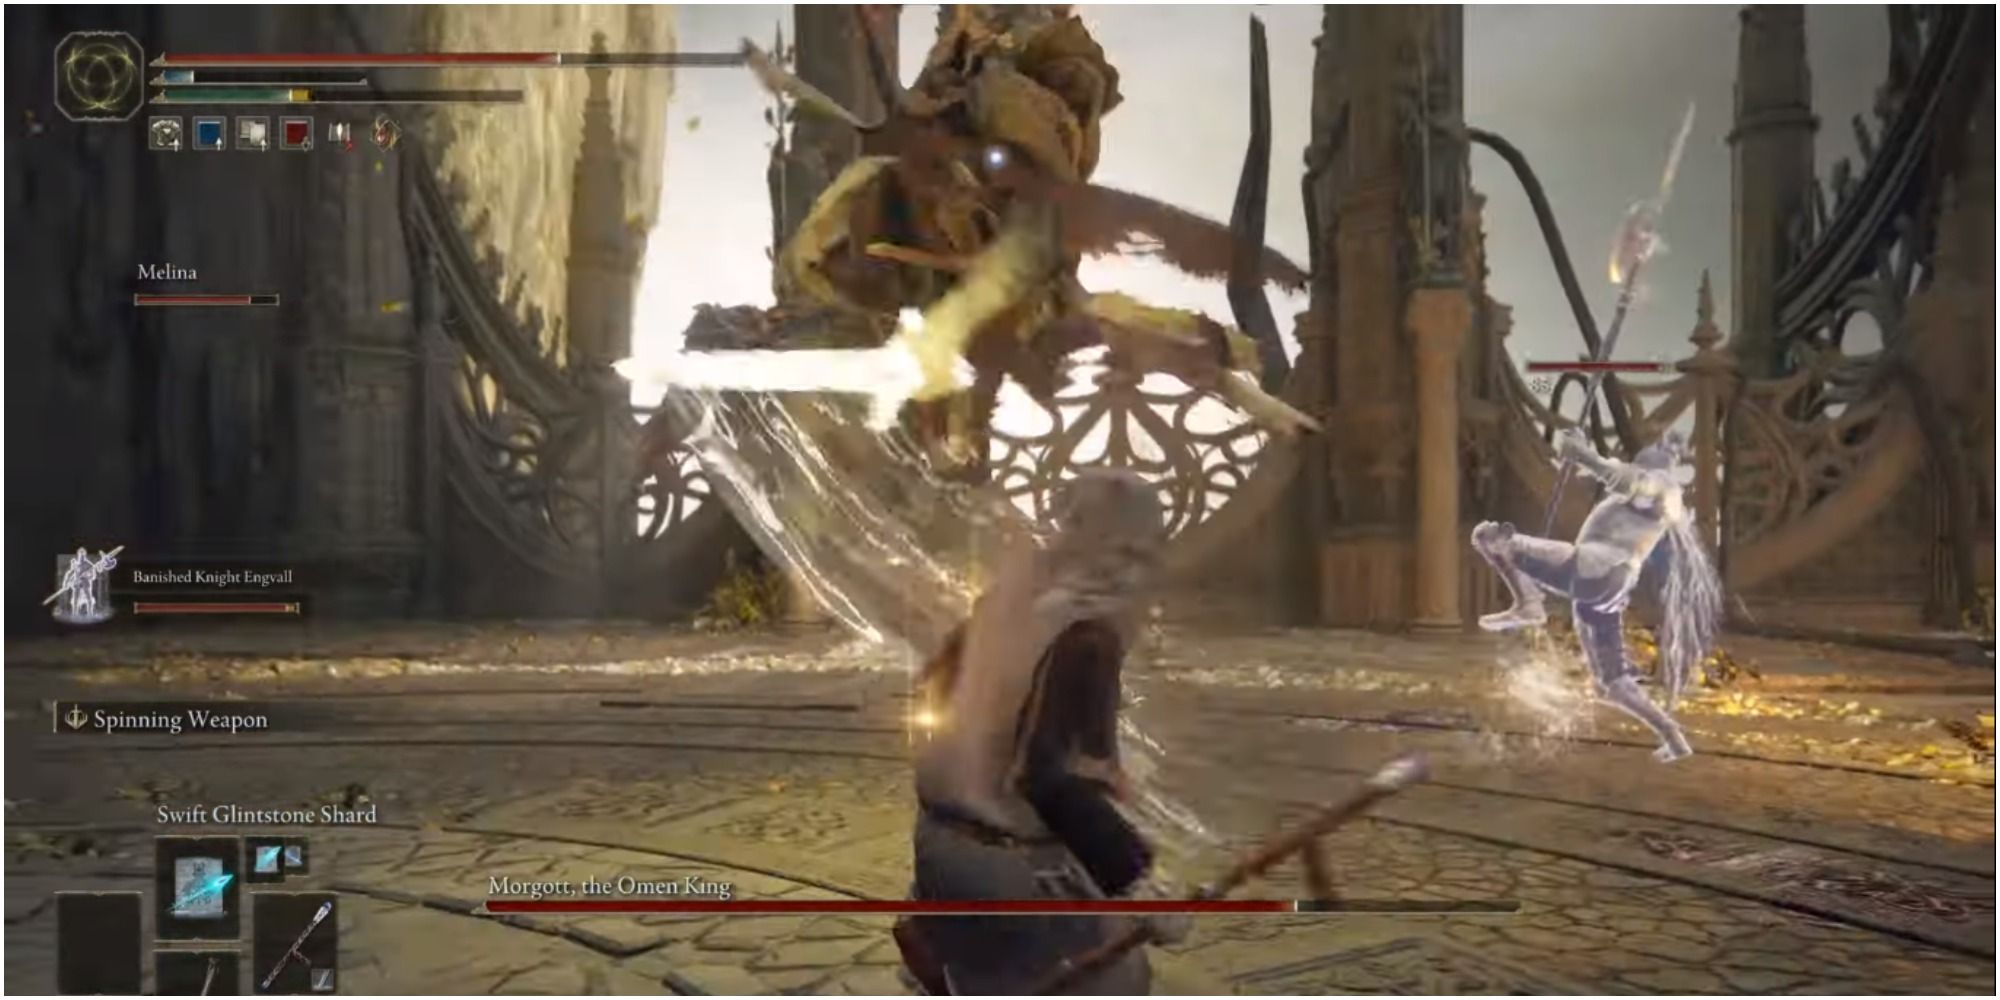 Morgott using his holy hammer and sword at the same time.